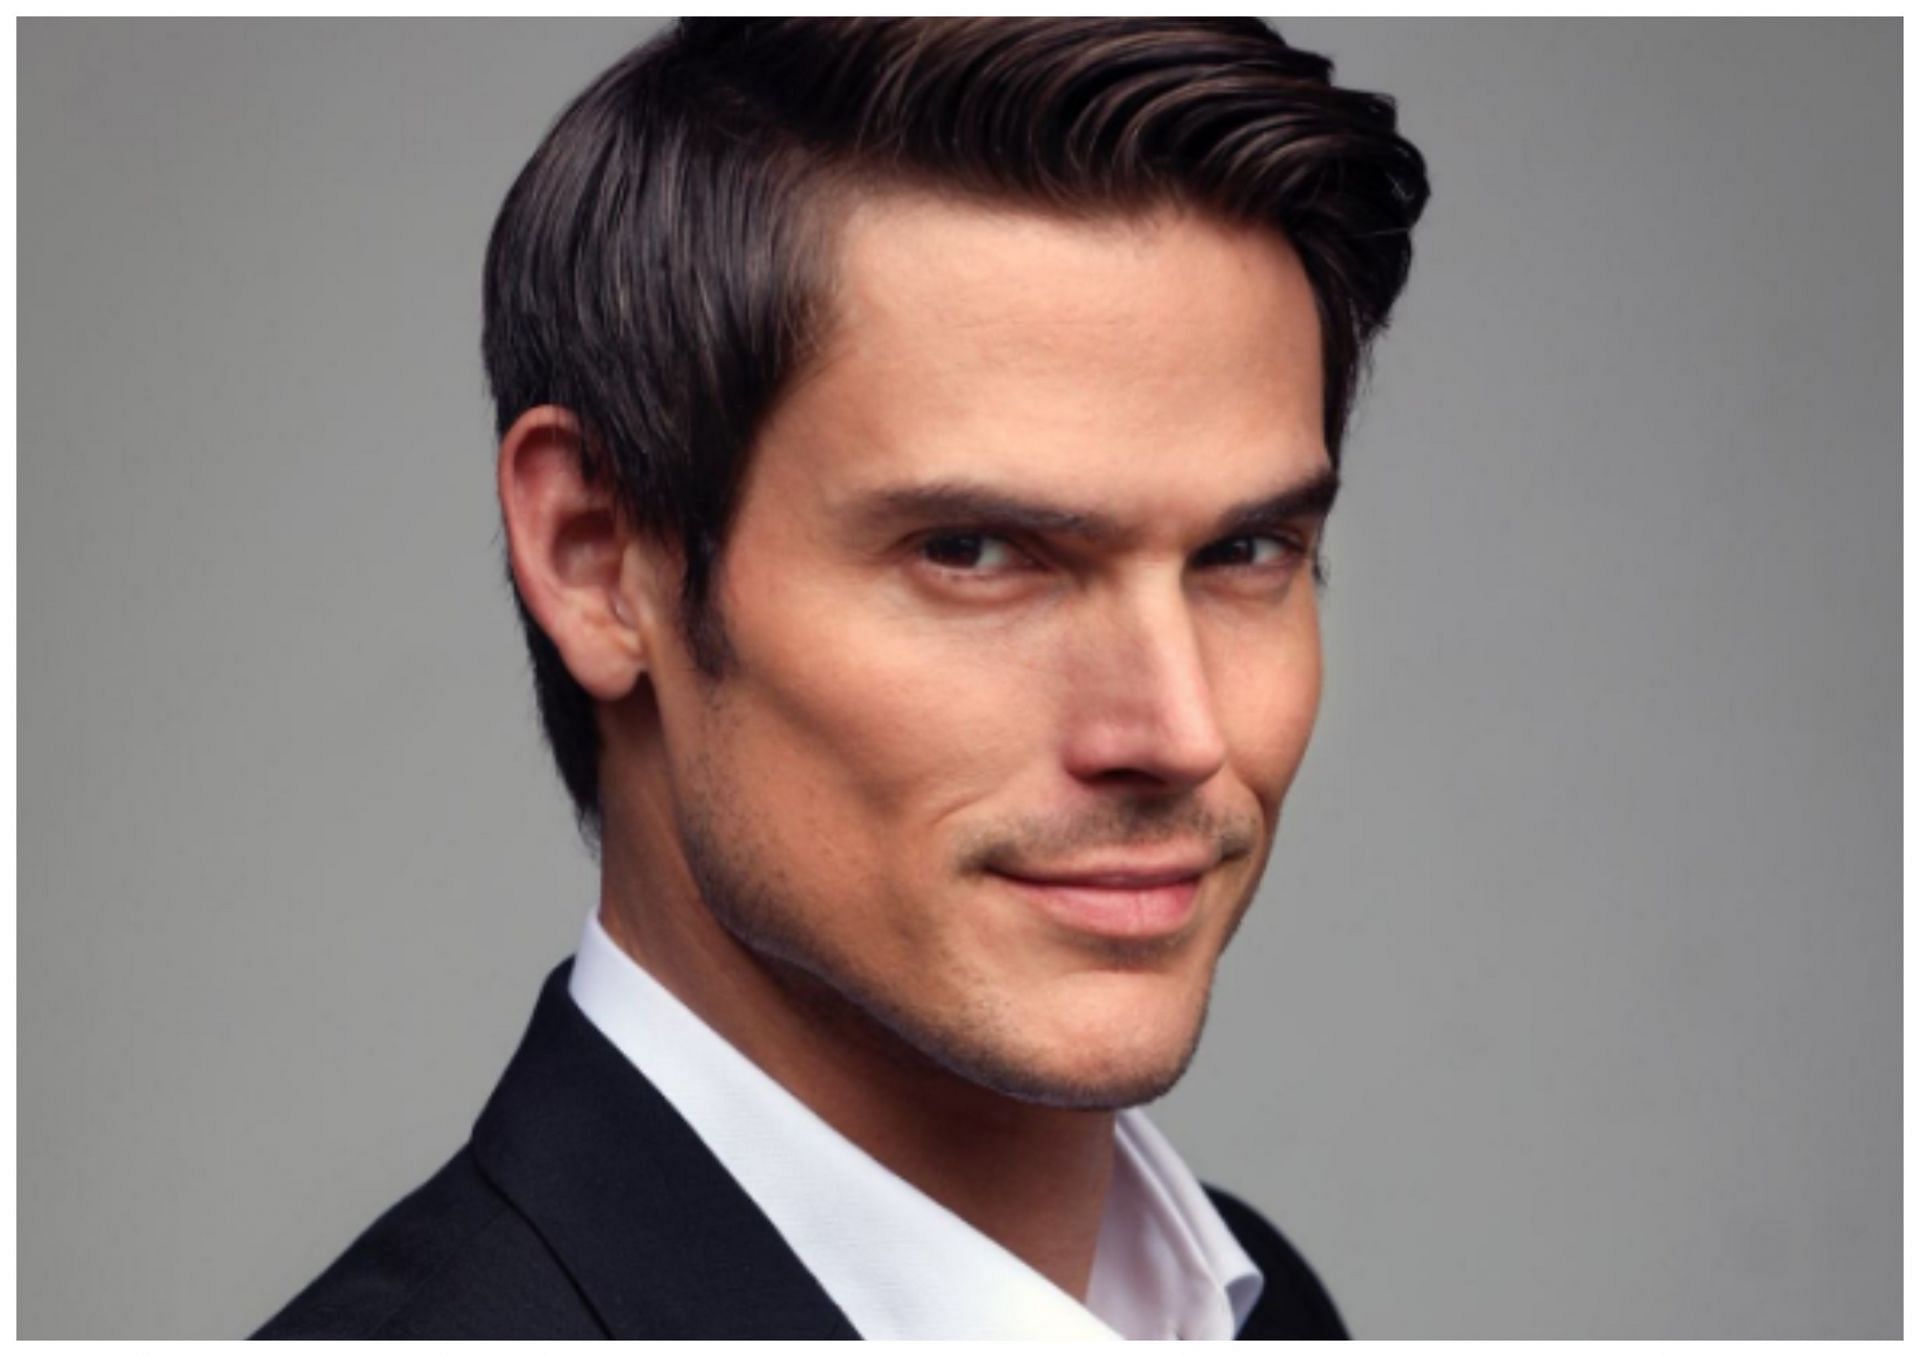 The Young and The Restless: Mark Grossman as Adam Newman (Image via IG @mgrossman18 )